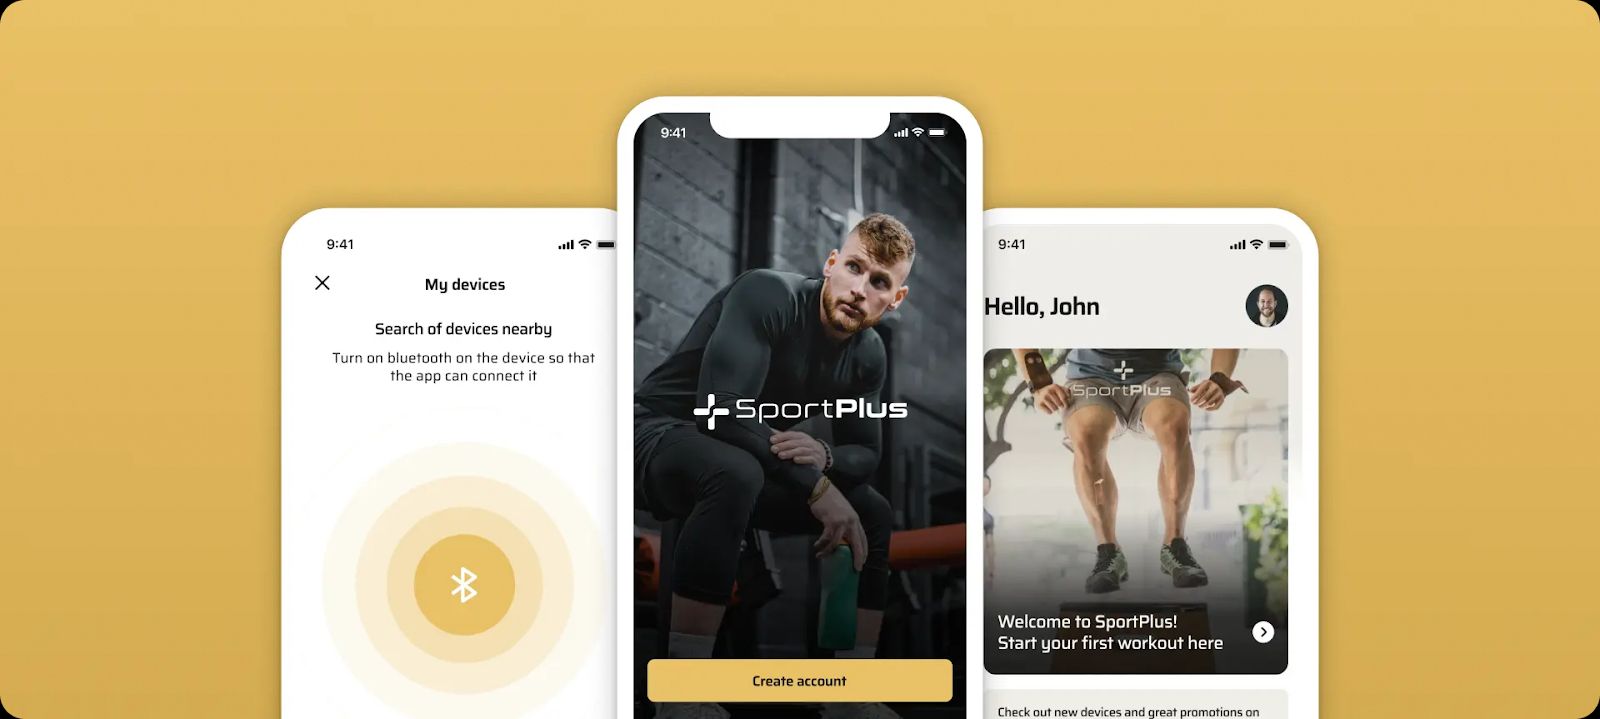 High-quality products, such as fitness apps, should focus on UX design